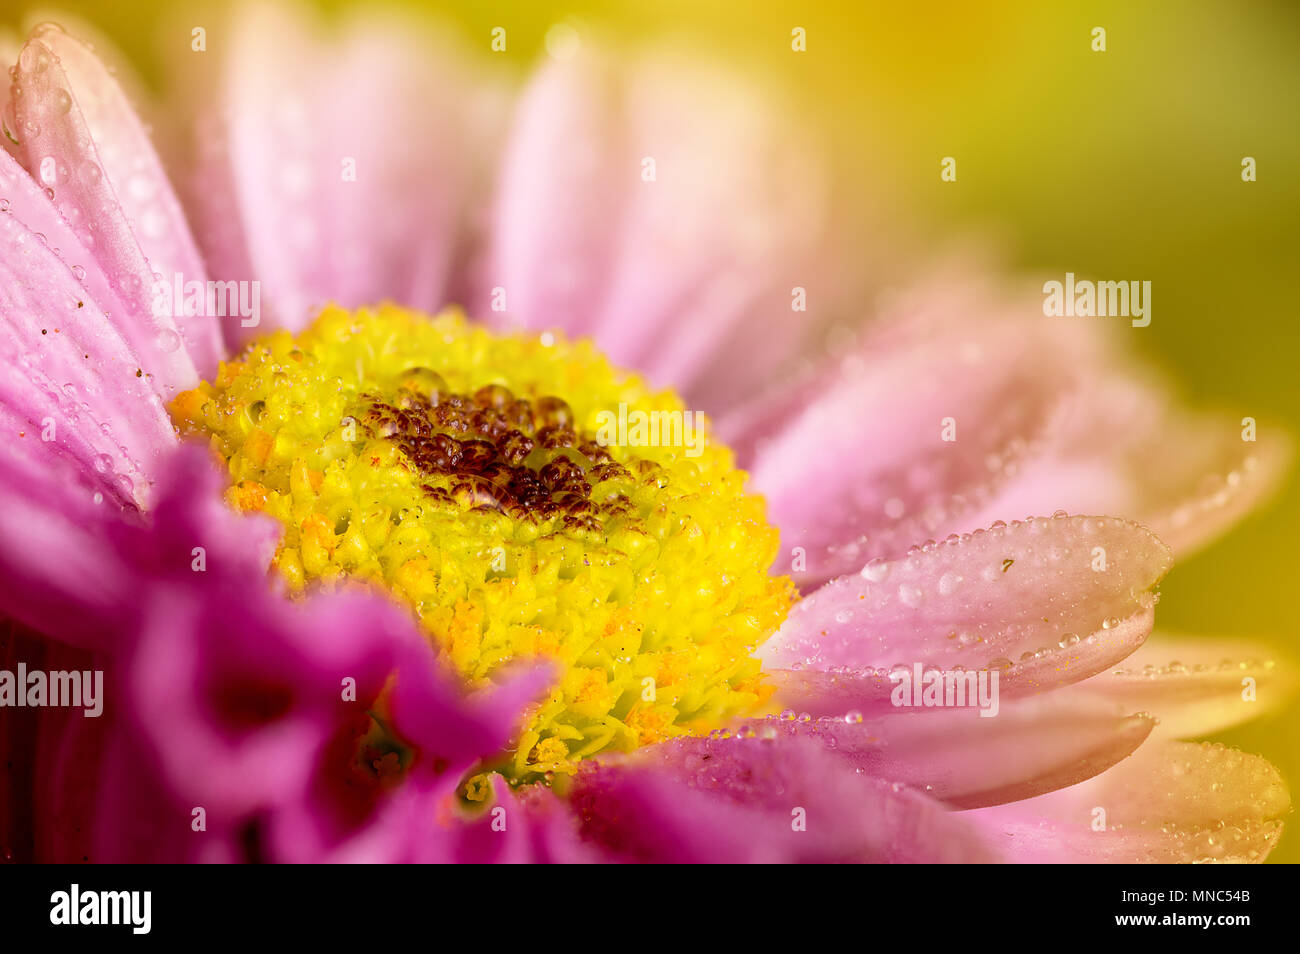 Pink Chrysanthemum flower center closeup macro, showing lots of details and water droplets on the petals Stock Photo